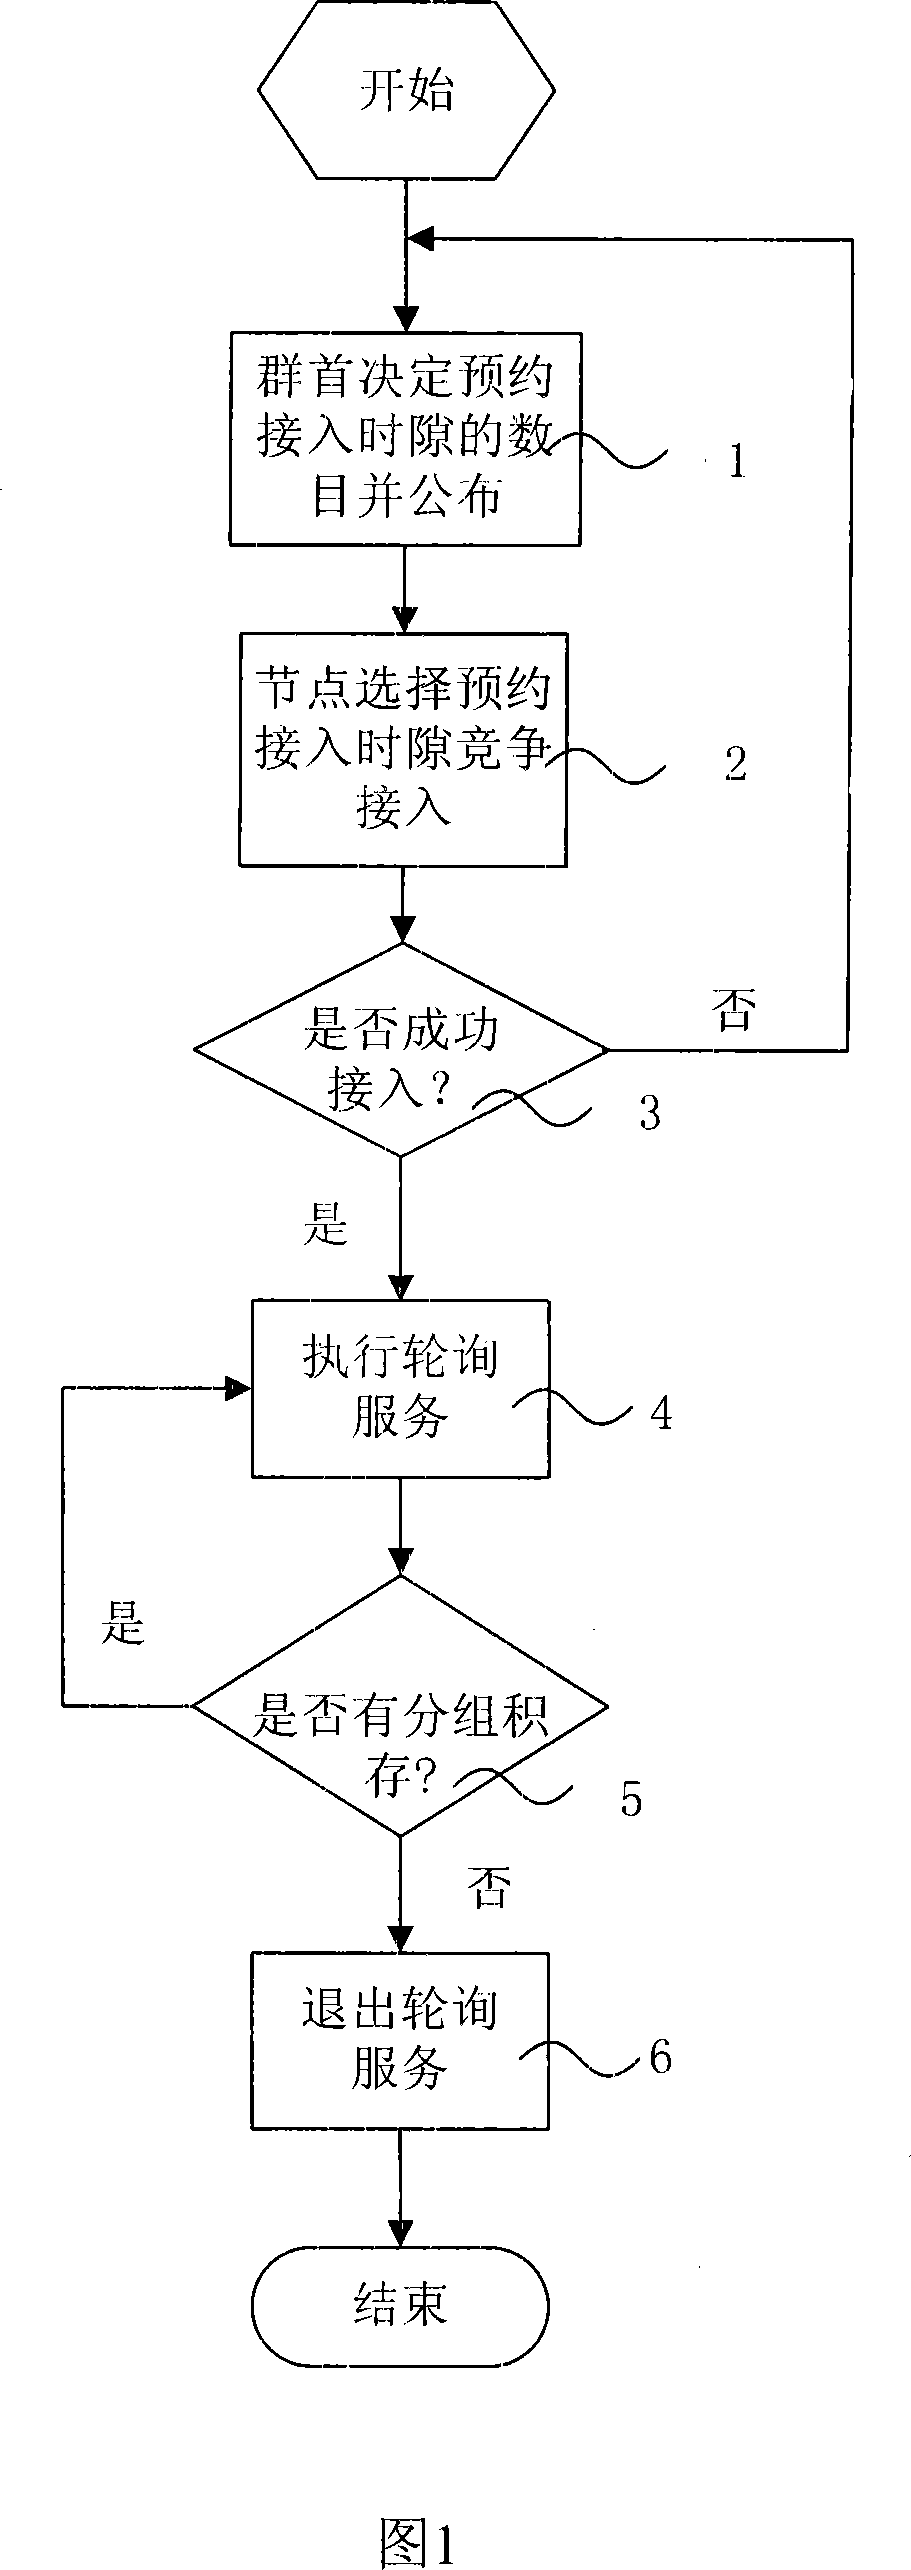 Multi-address access method according to requirement